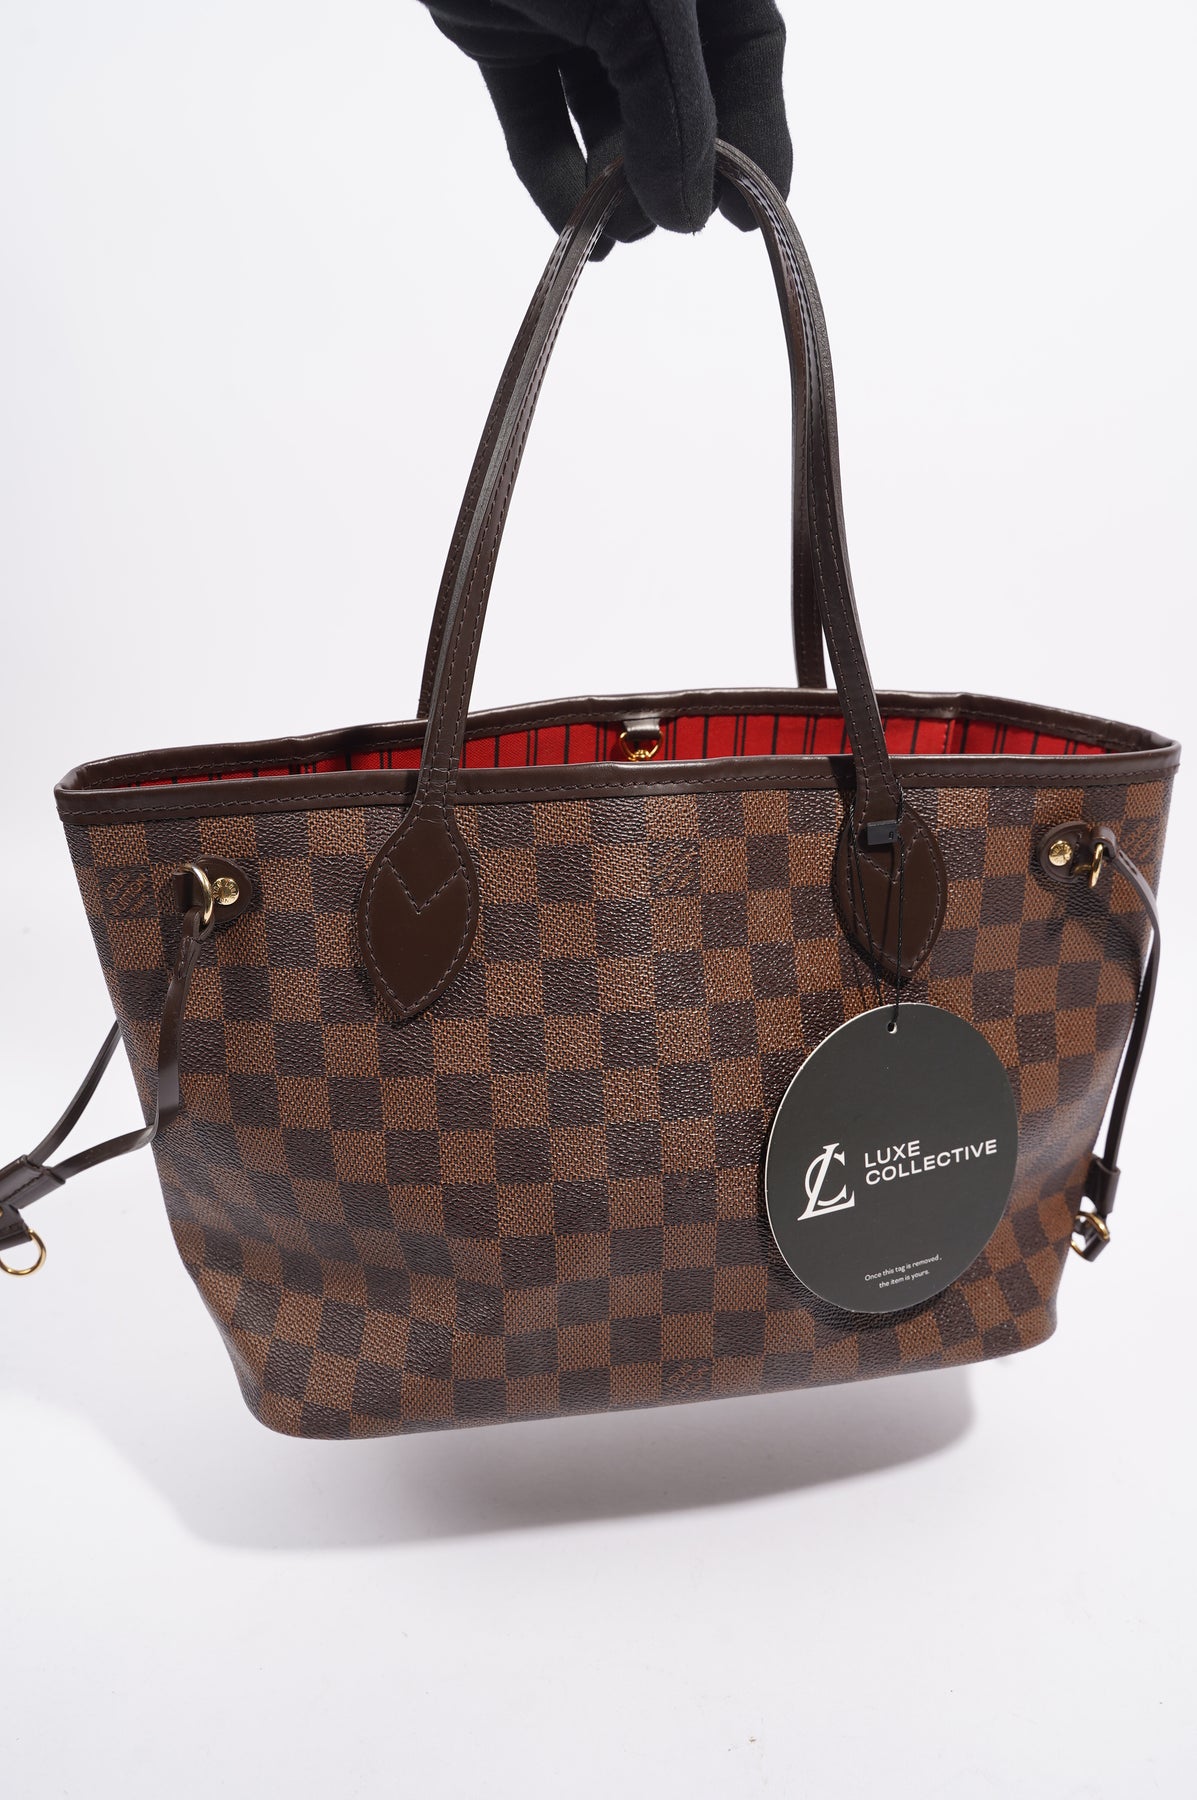 NEW! 2017 Louis Vuitton Damier Ebene Canvas Neverfull PM Tote